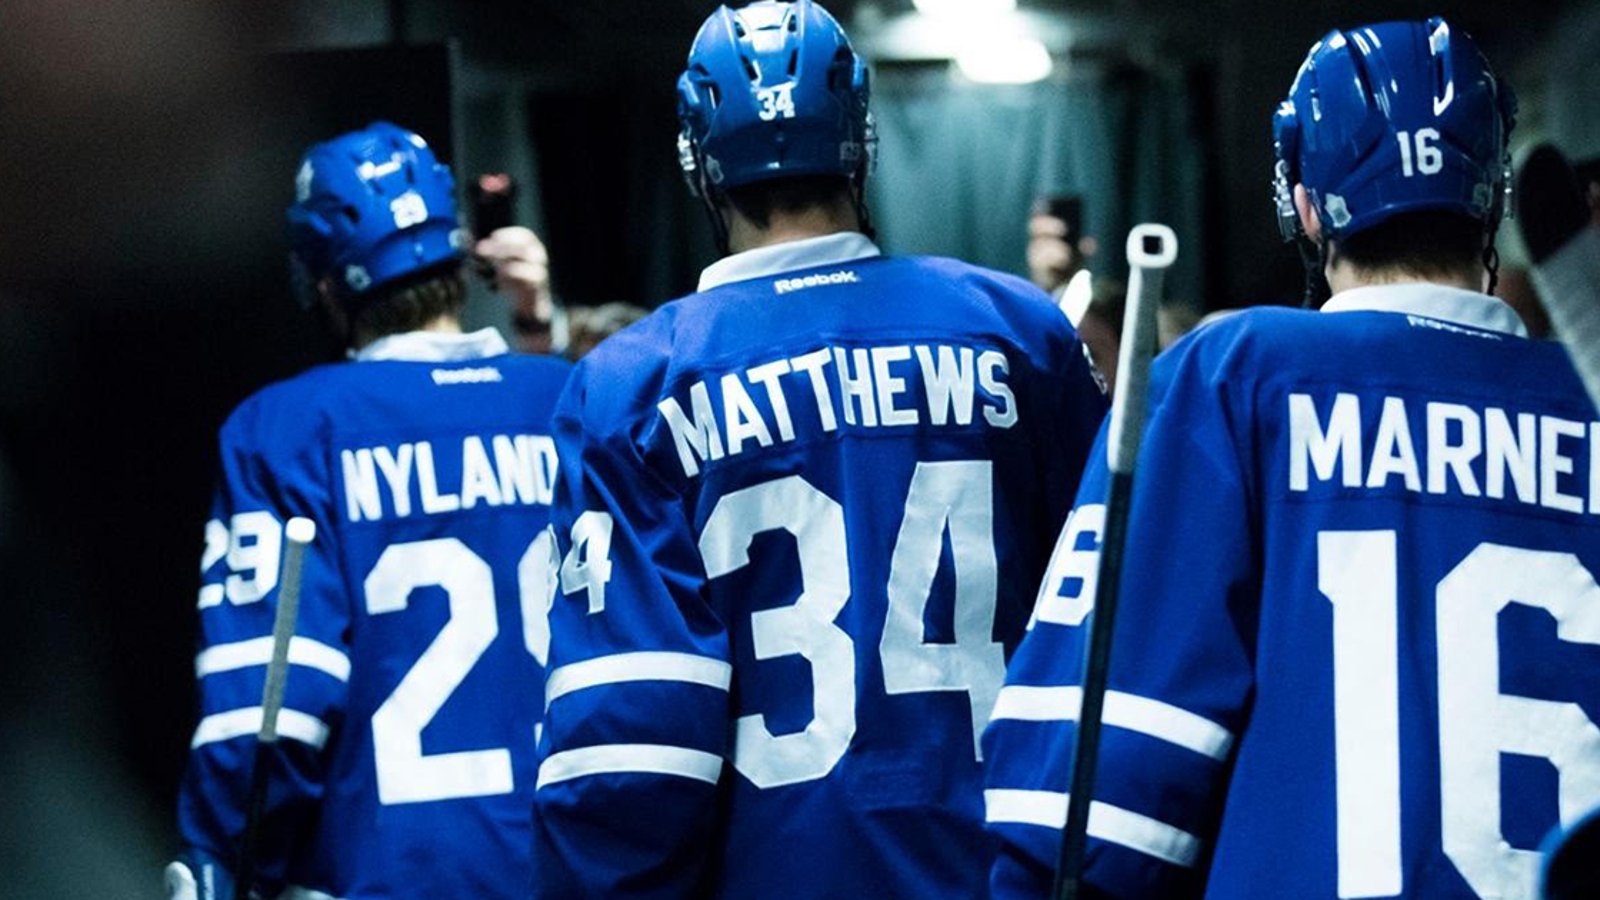 Your Call: Can the Leafs retain their core?